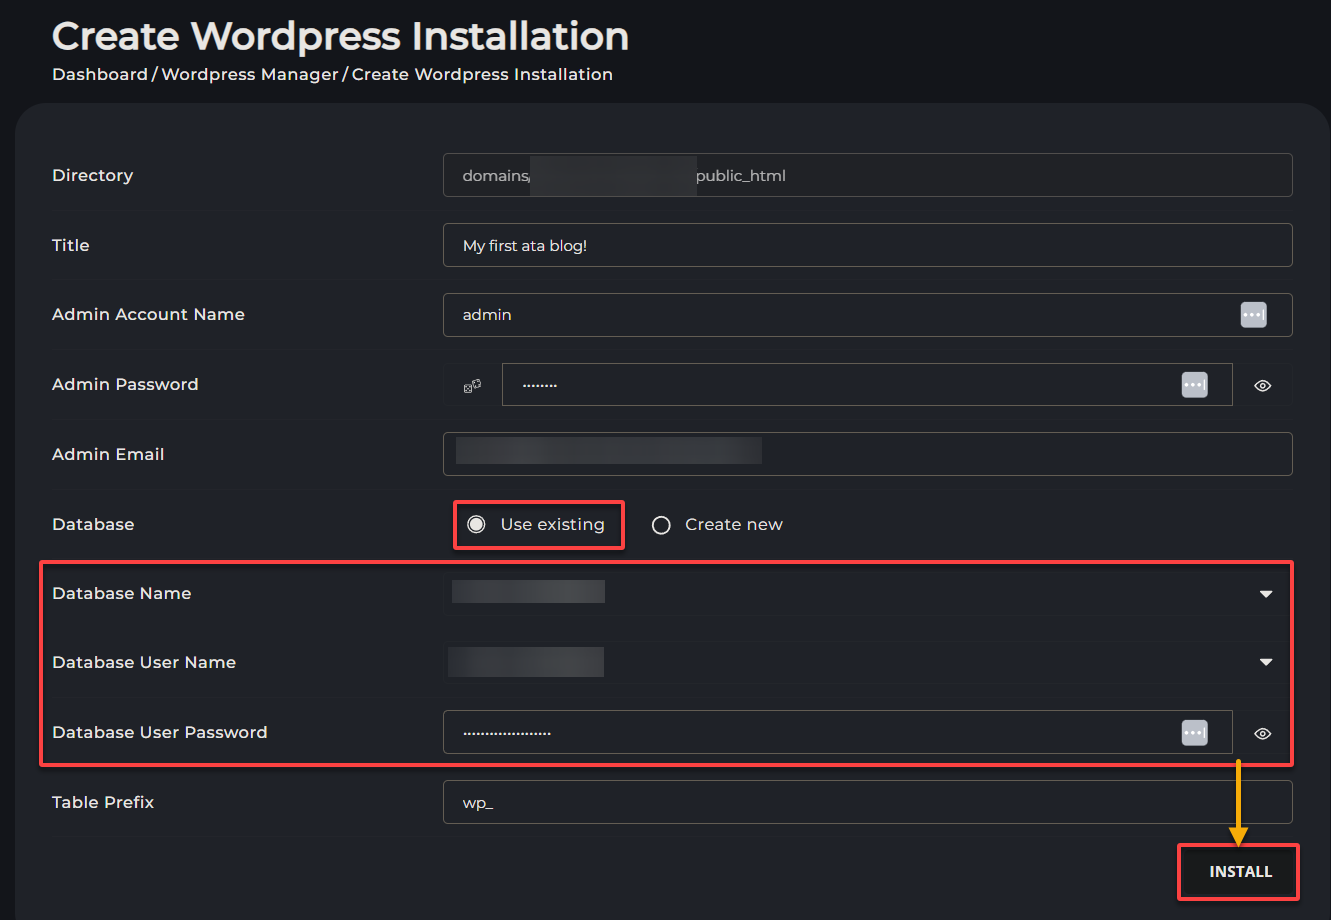 Setting database credentials and installing WordPress